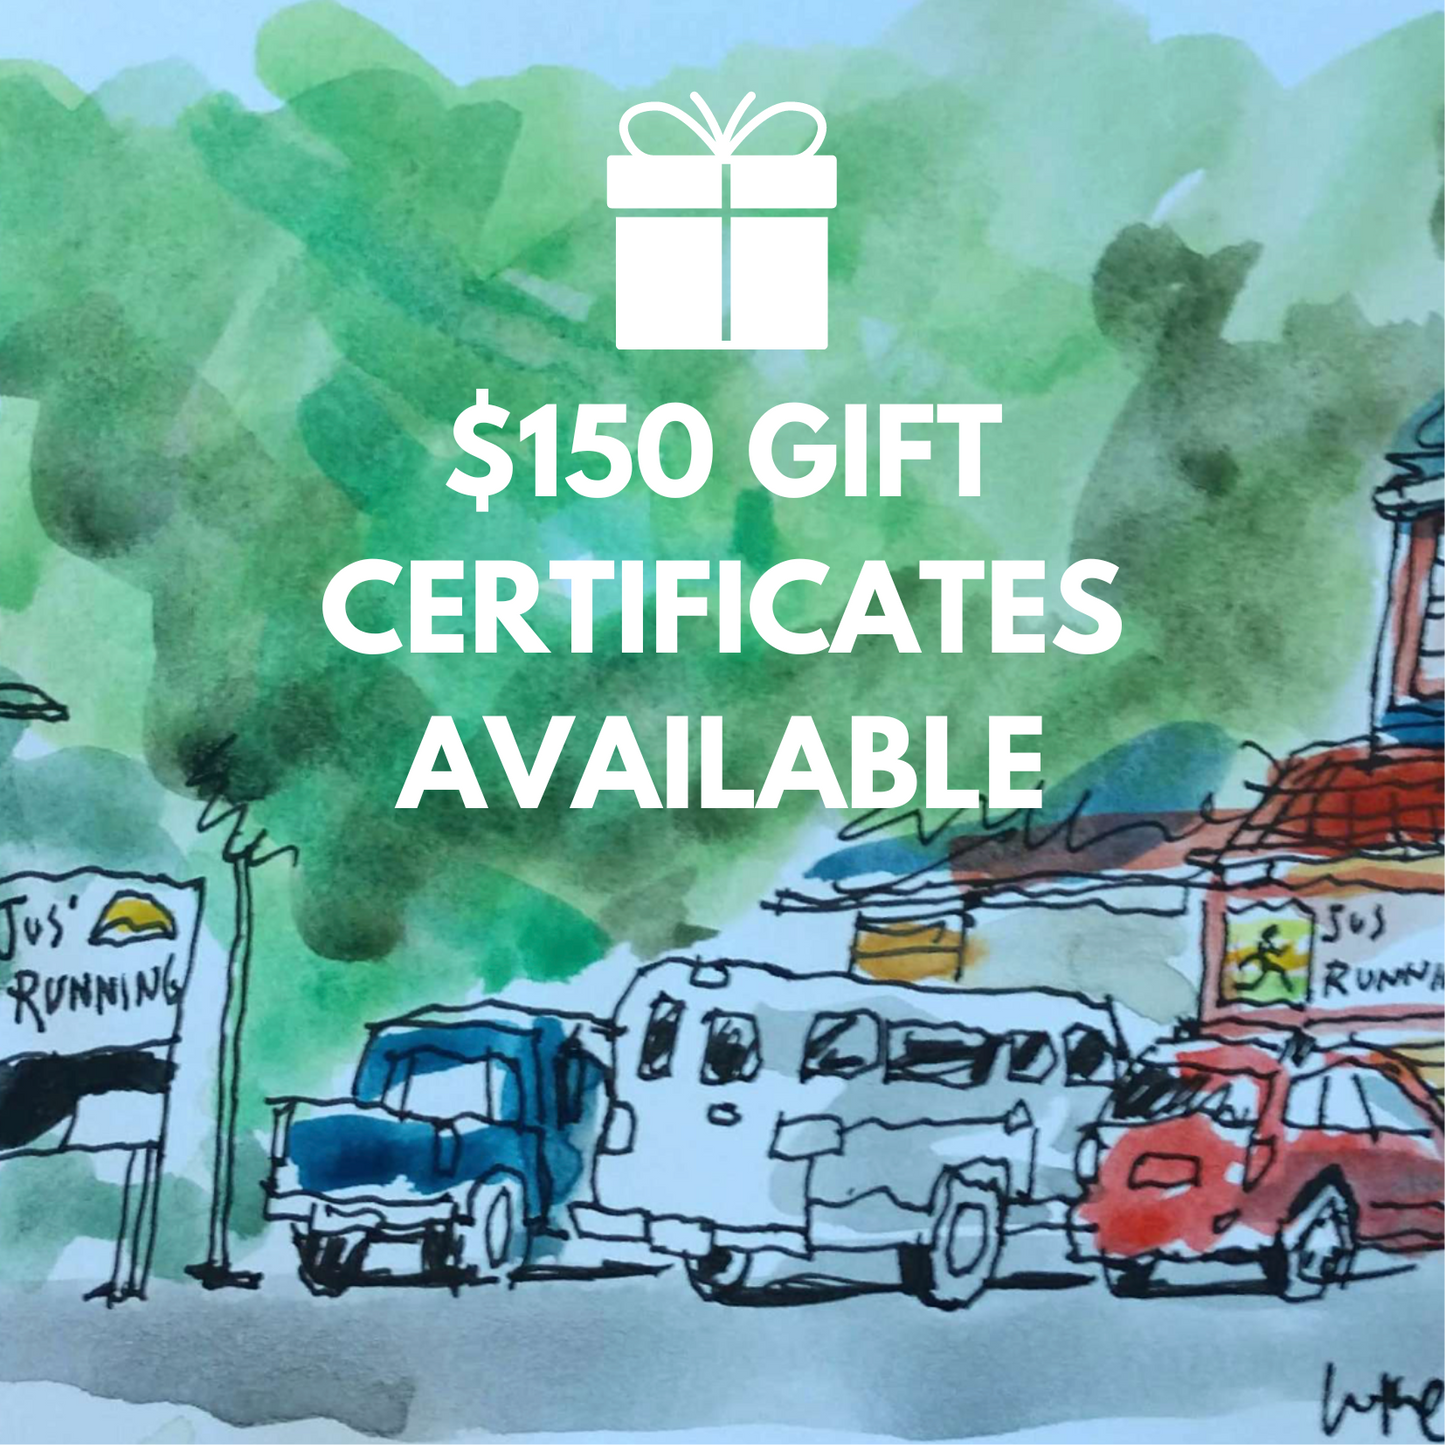 $150 Gift Certificate